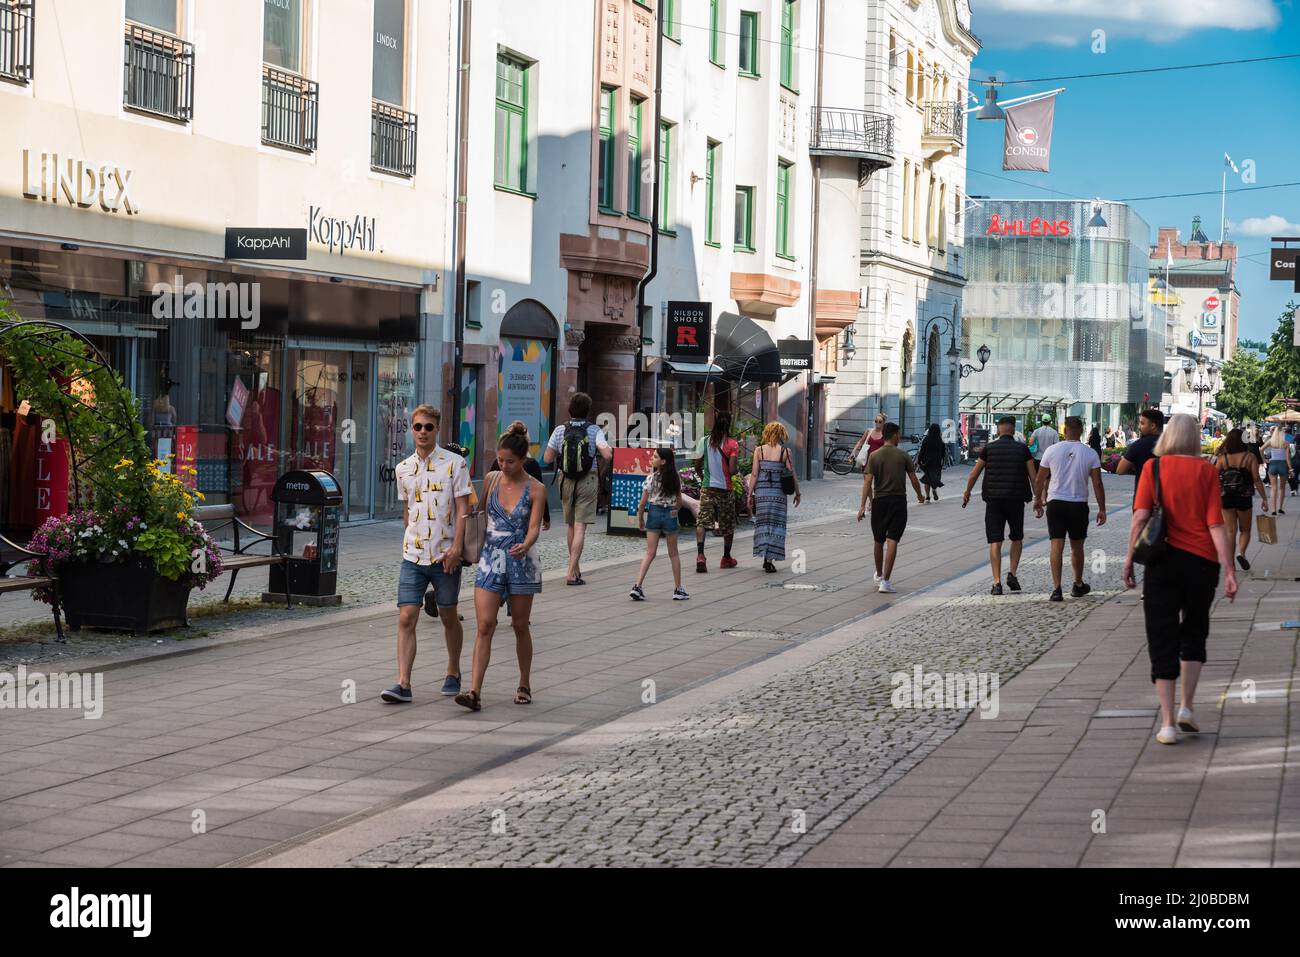 Uppsala, Uppland  Sweden - 07 27 2019- People of mixed ages and gender walking through the shopping streets of the city center Stock Photo